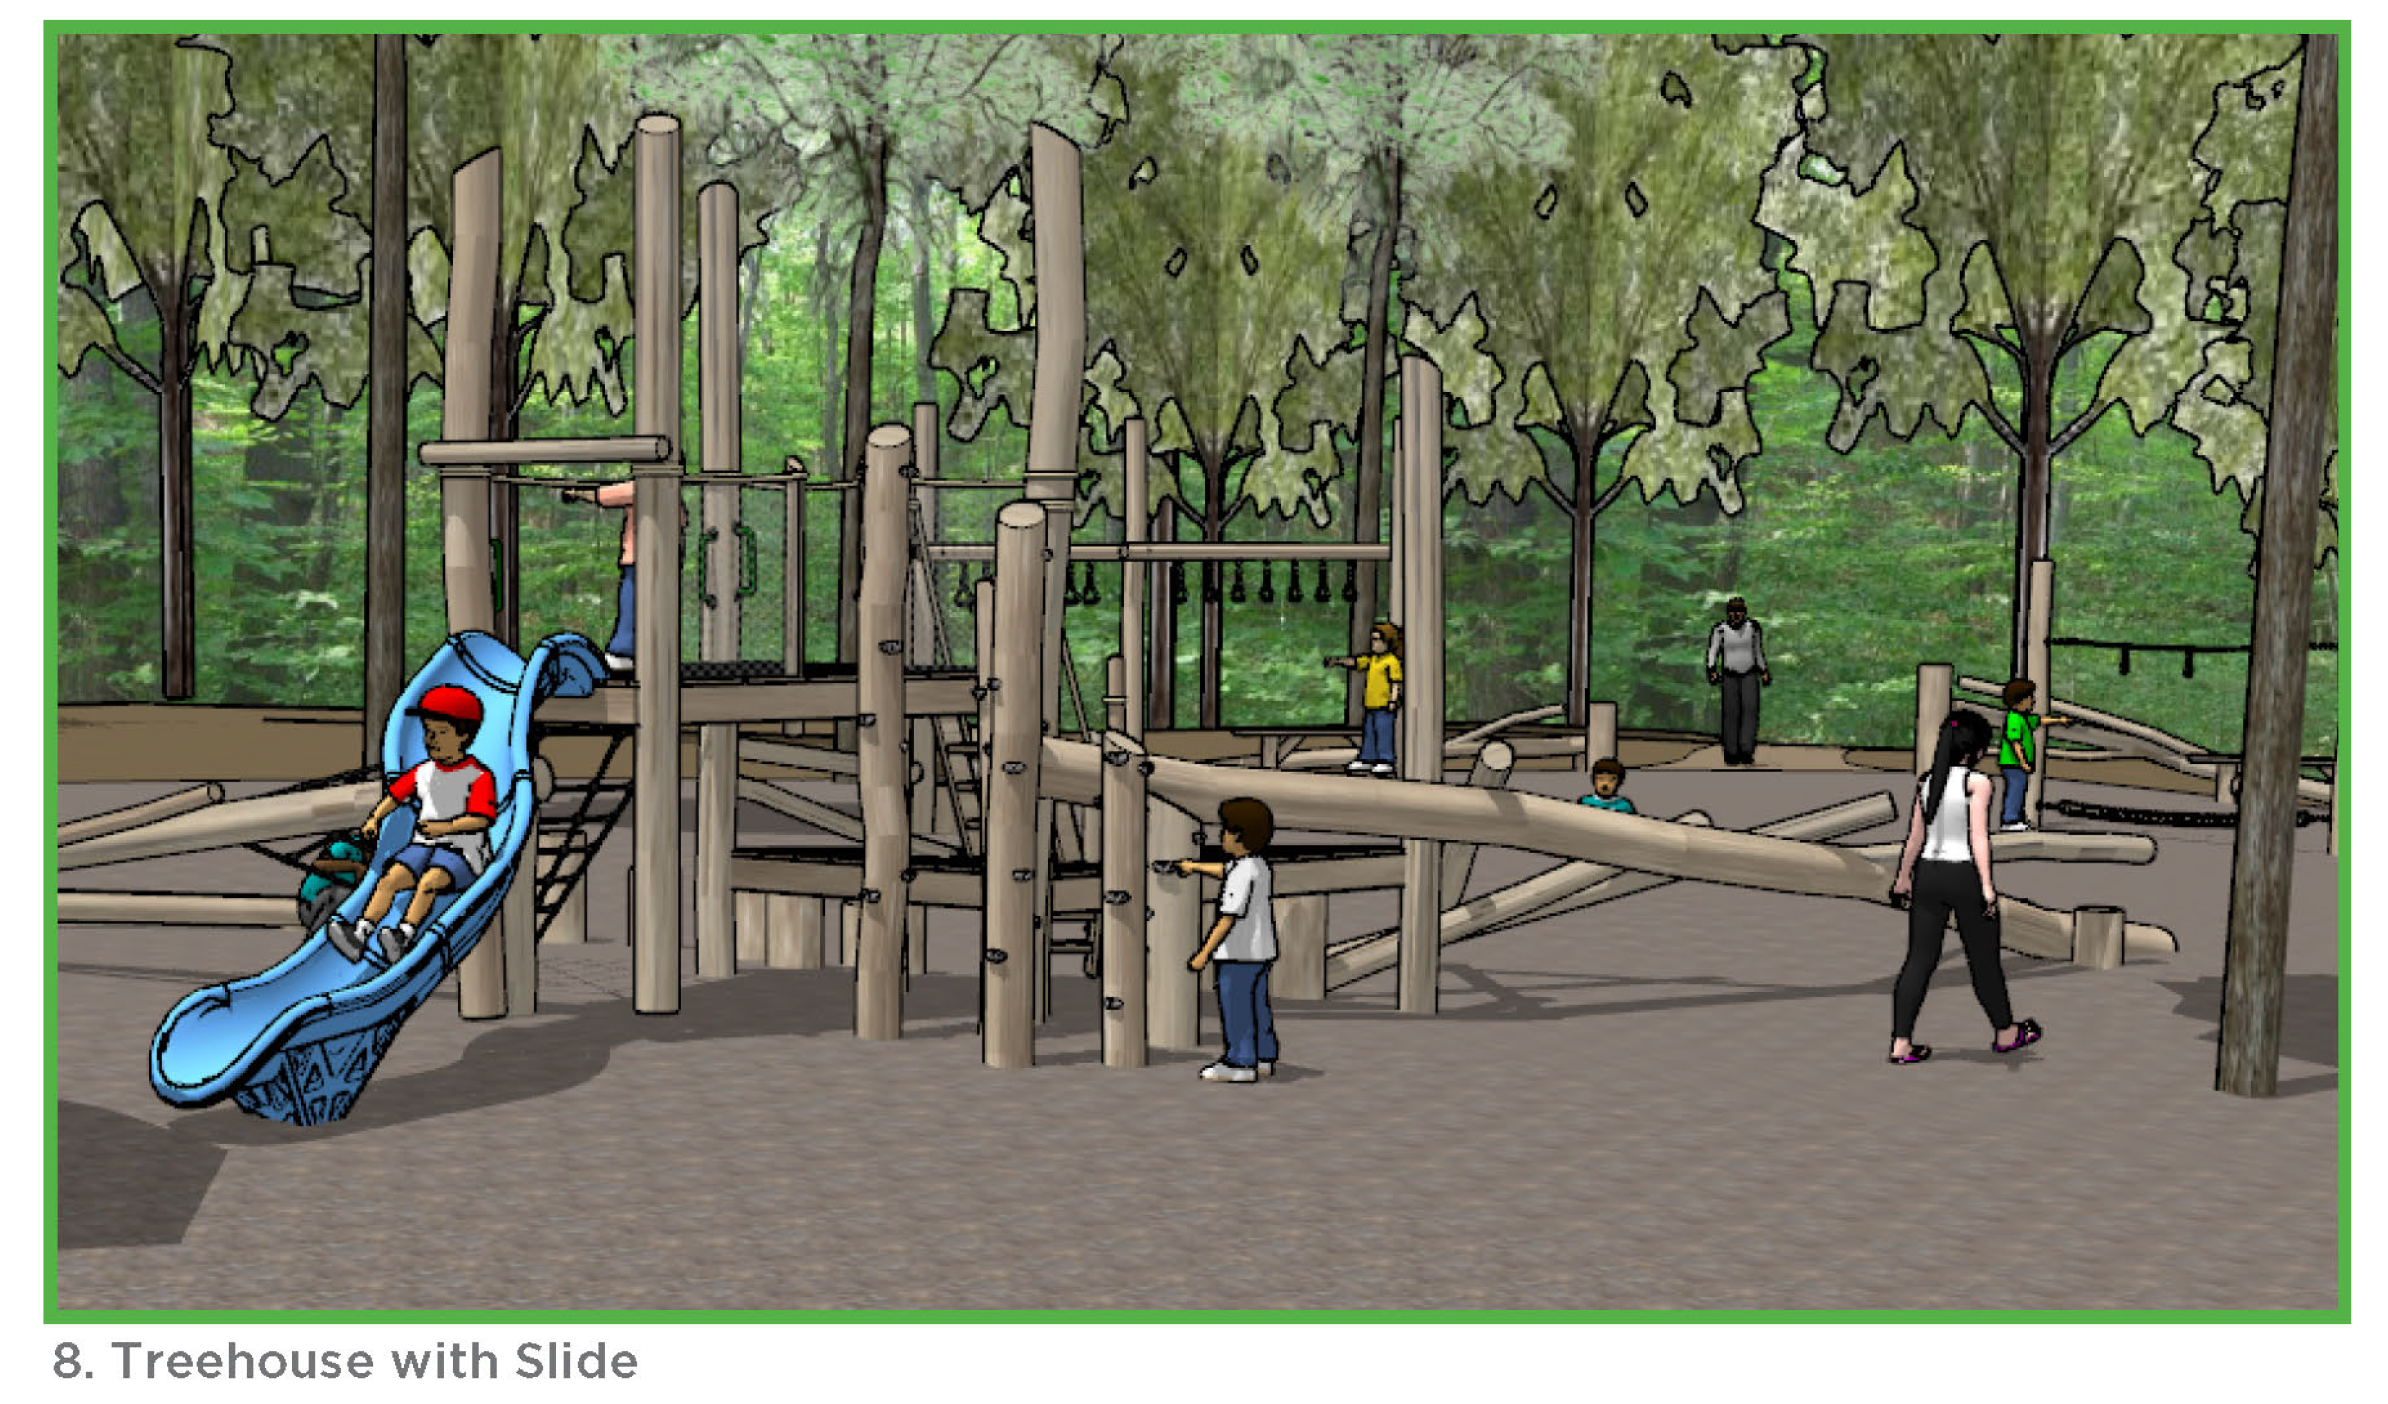 Photo of the treehouse with slide.